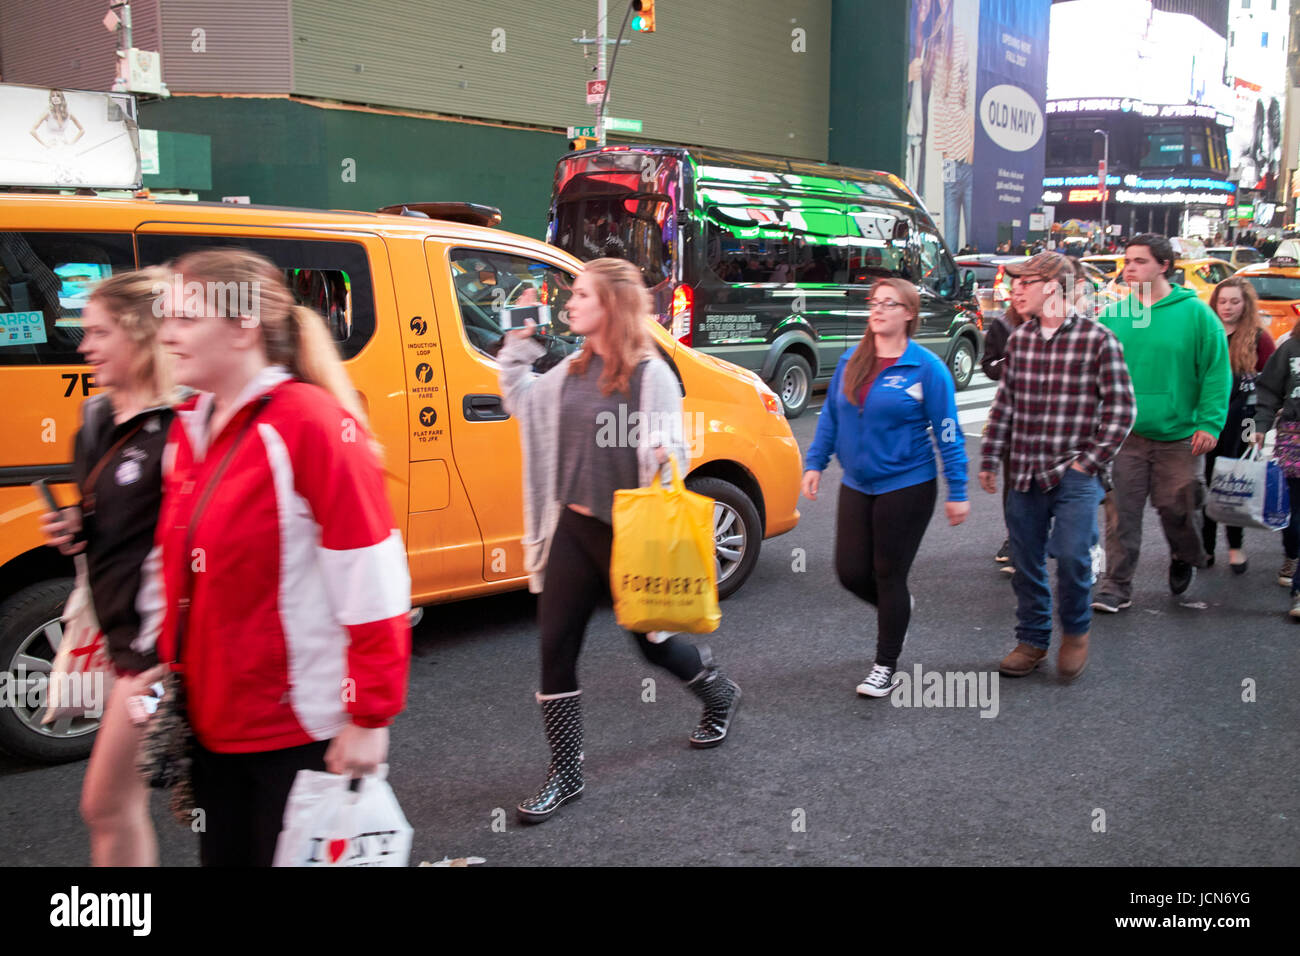 people walking in the road through stopped traffic evening in Times Square New York City USA deliberate motion blur Stock Photo